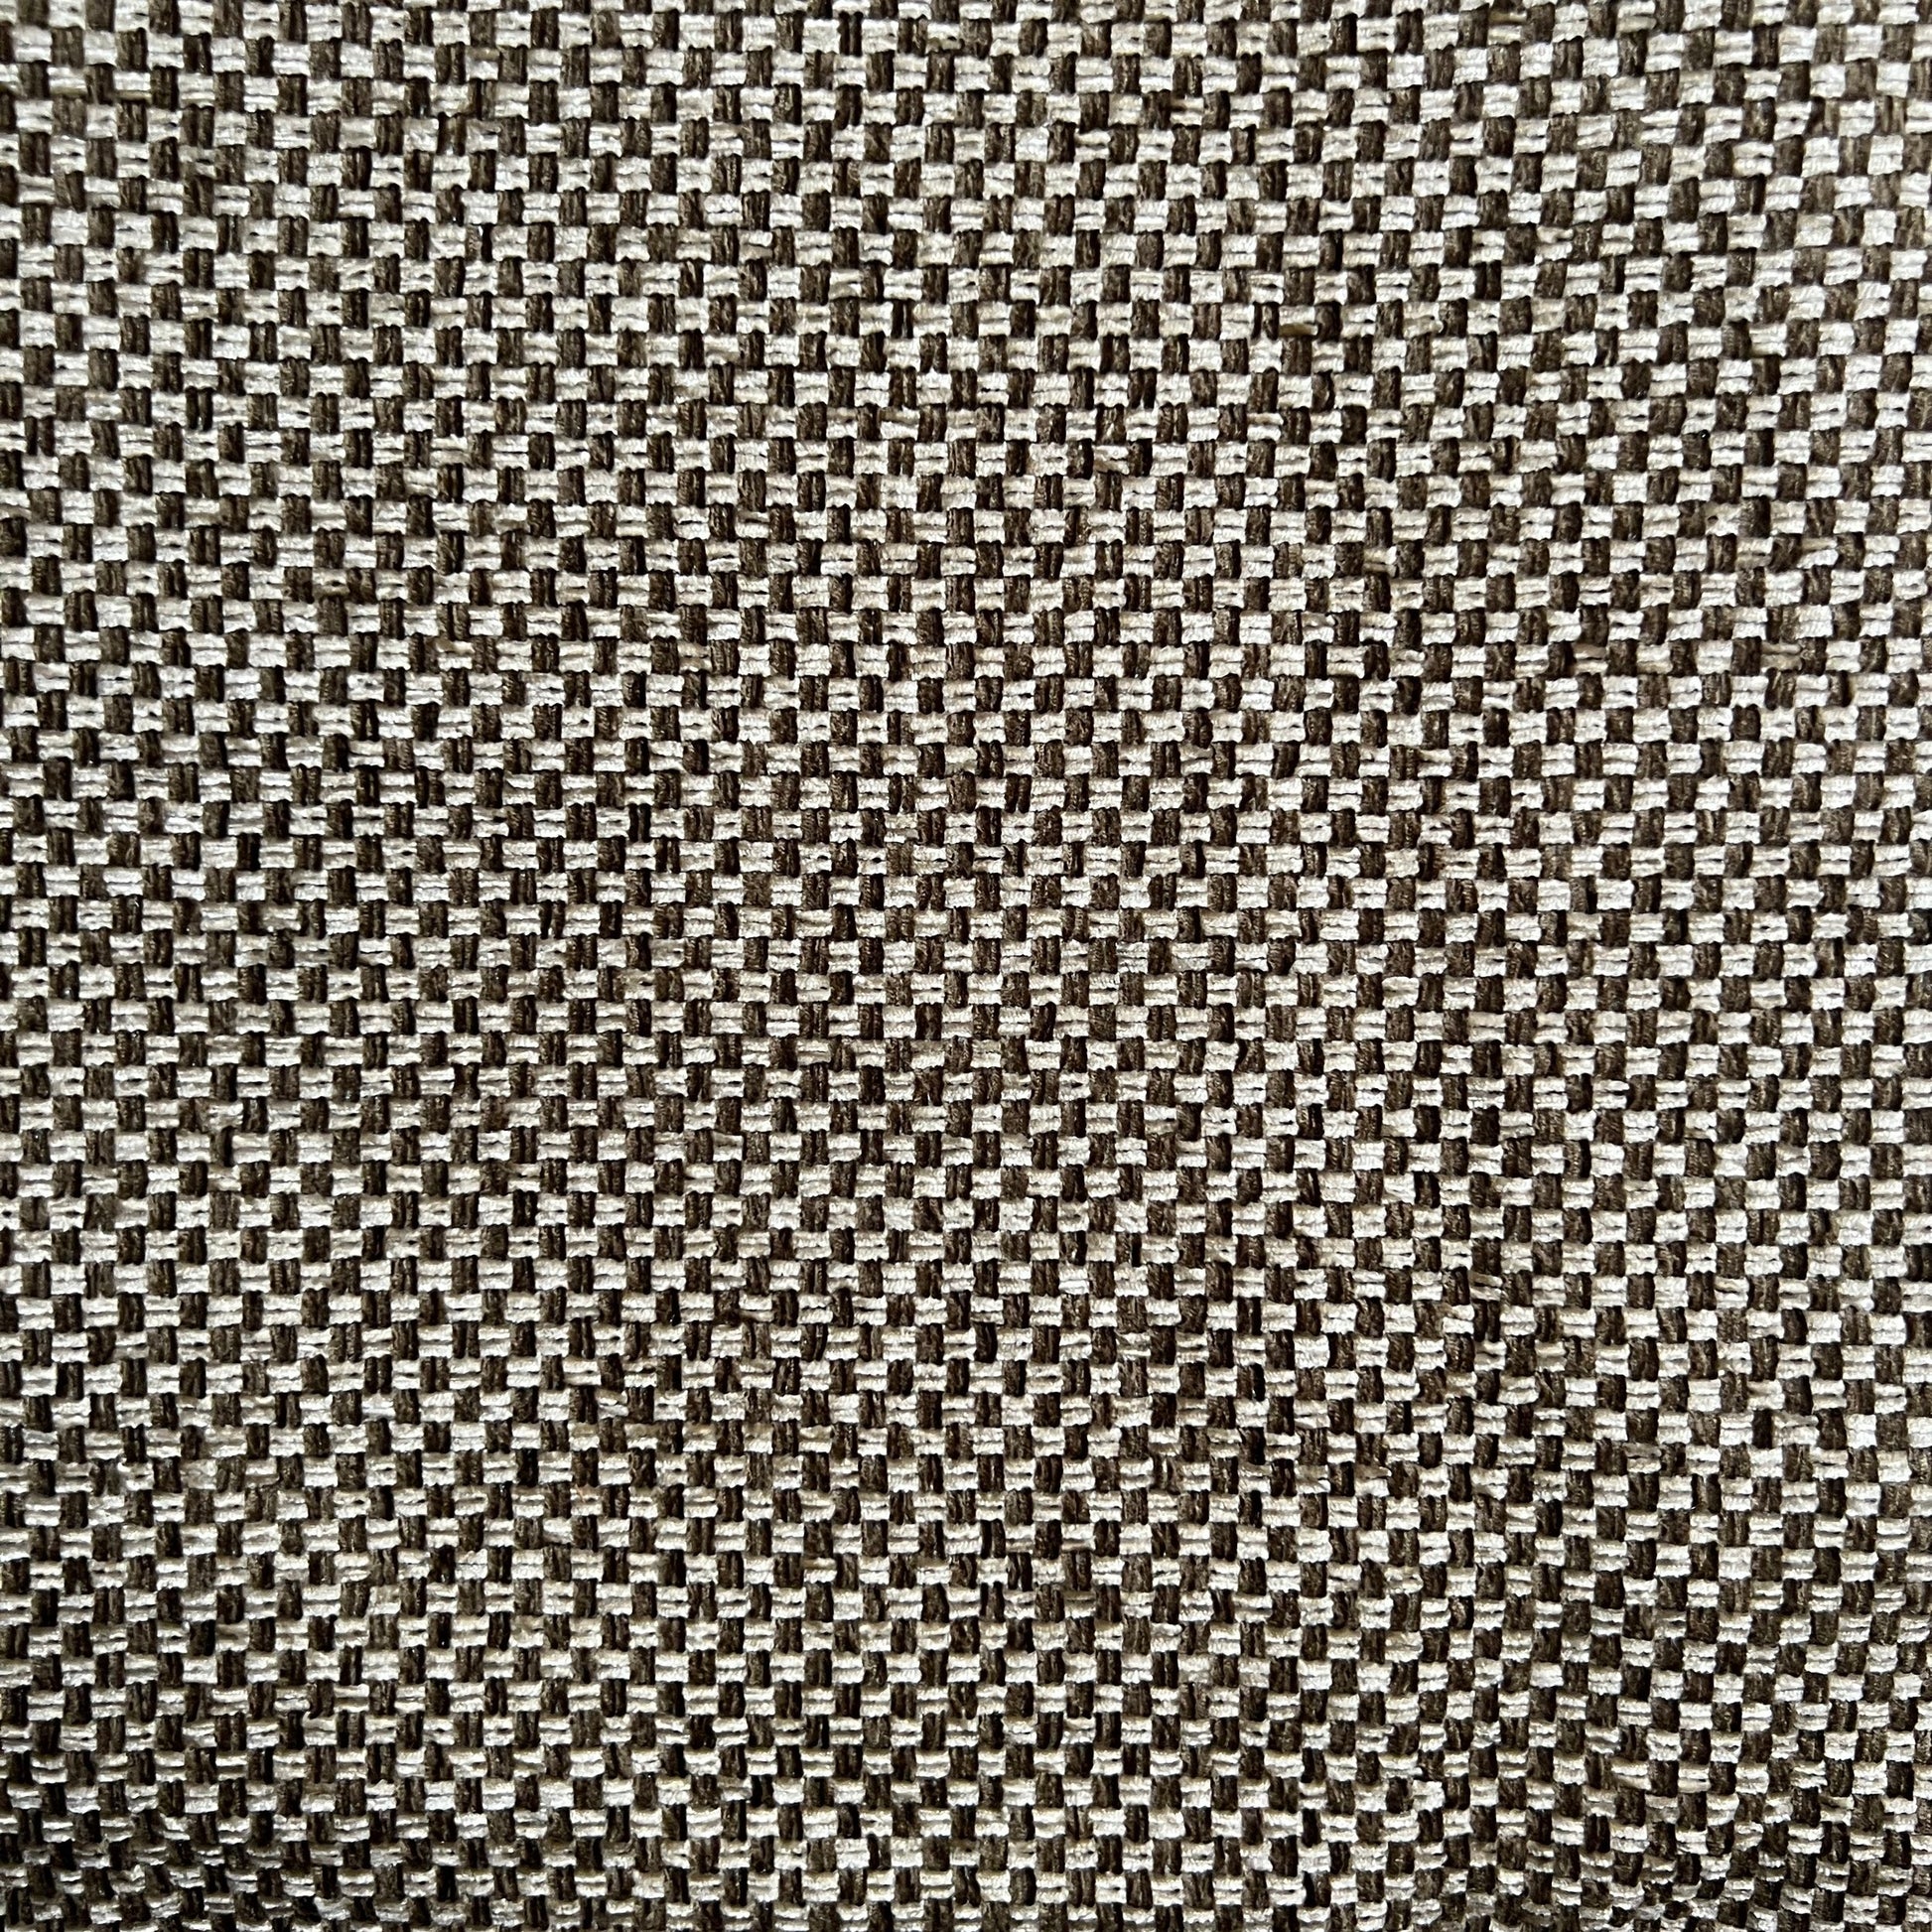 Tan Chenille Checkered Upholstery: 1.25 yds